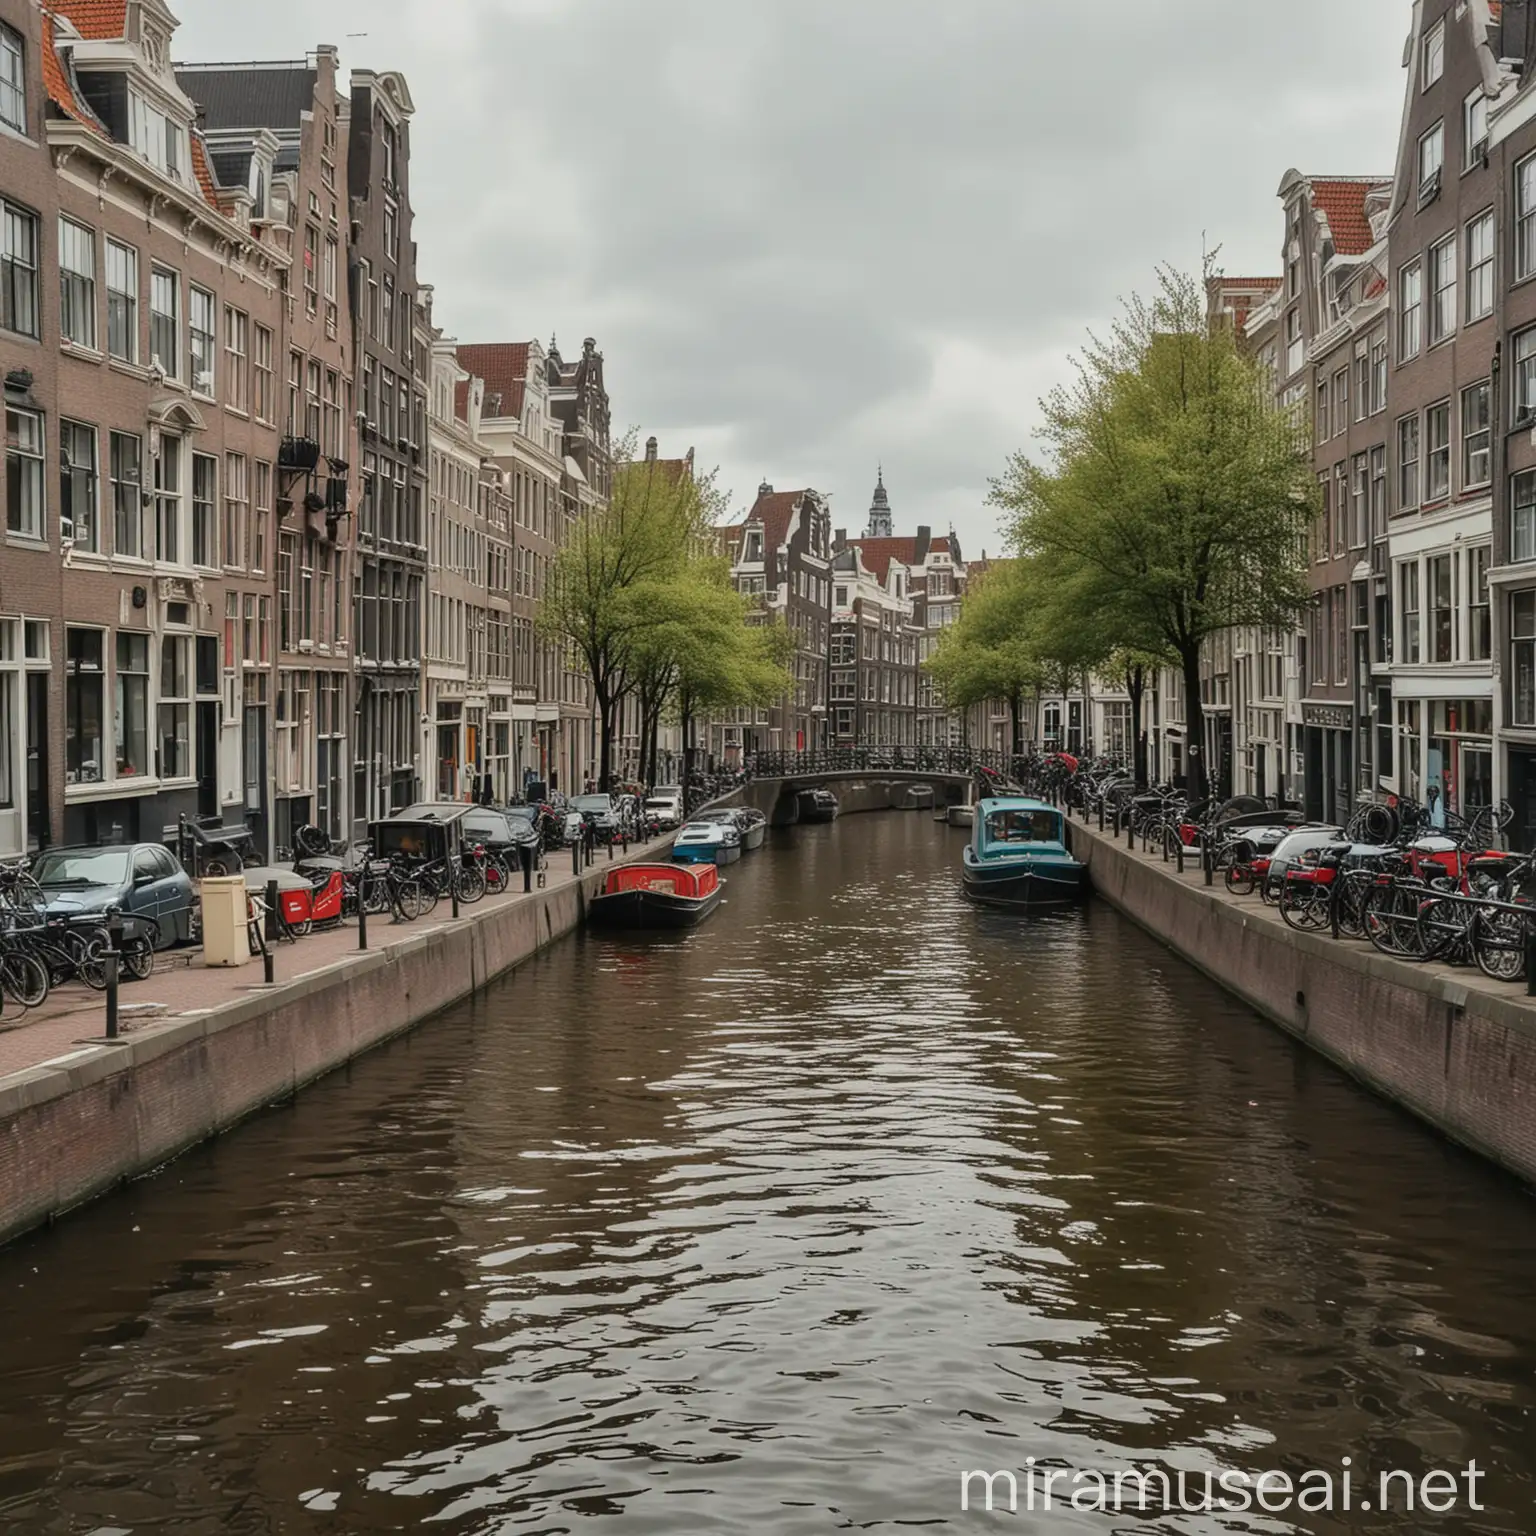 SCROLLING THROUGH THE PICTURESQUE CANALS OF AMSTERDAM : A CITY BUILT ON WATER